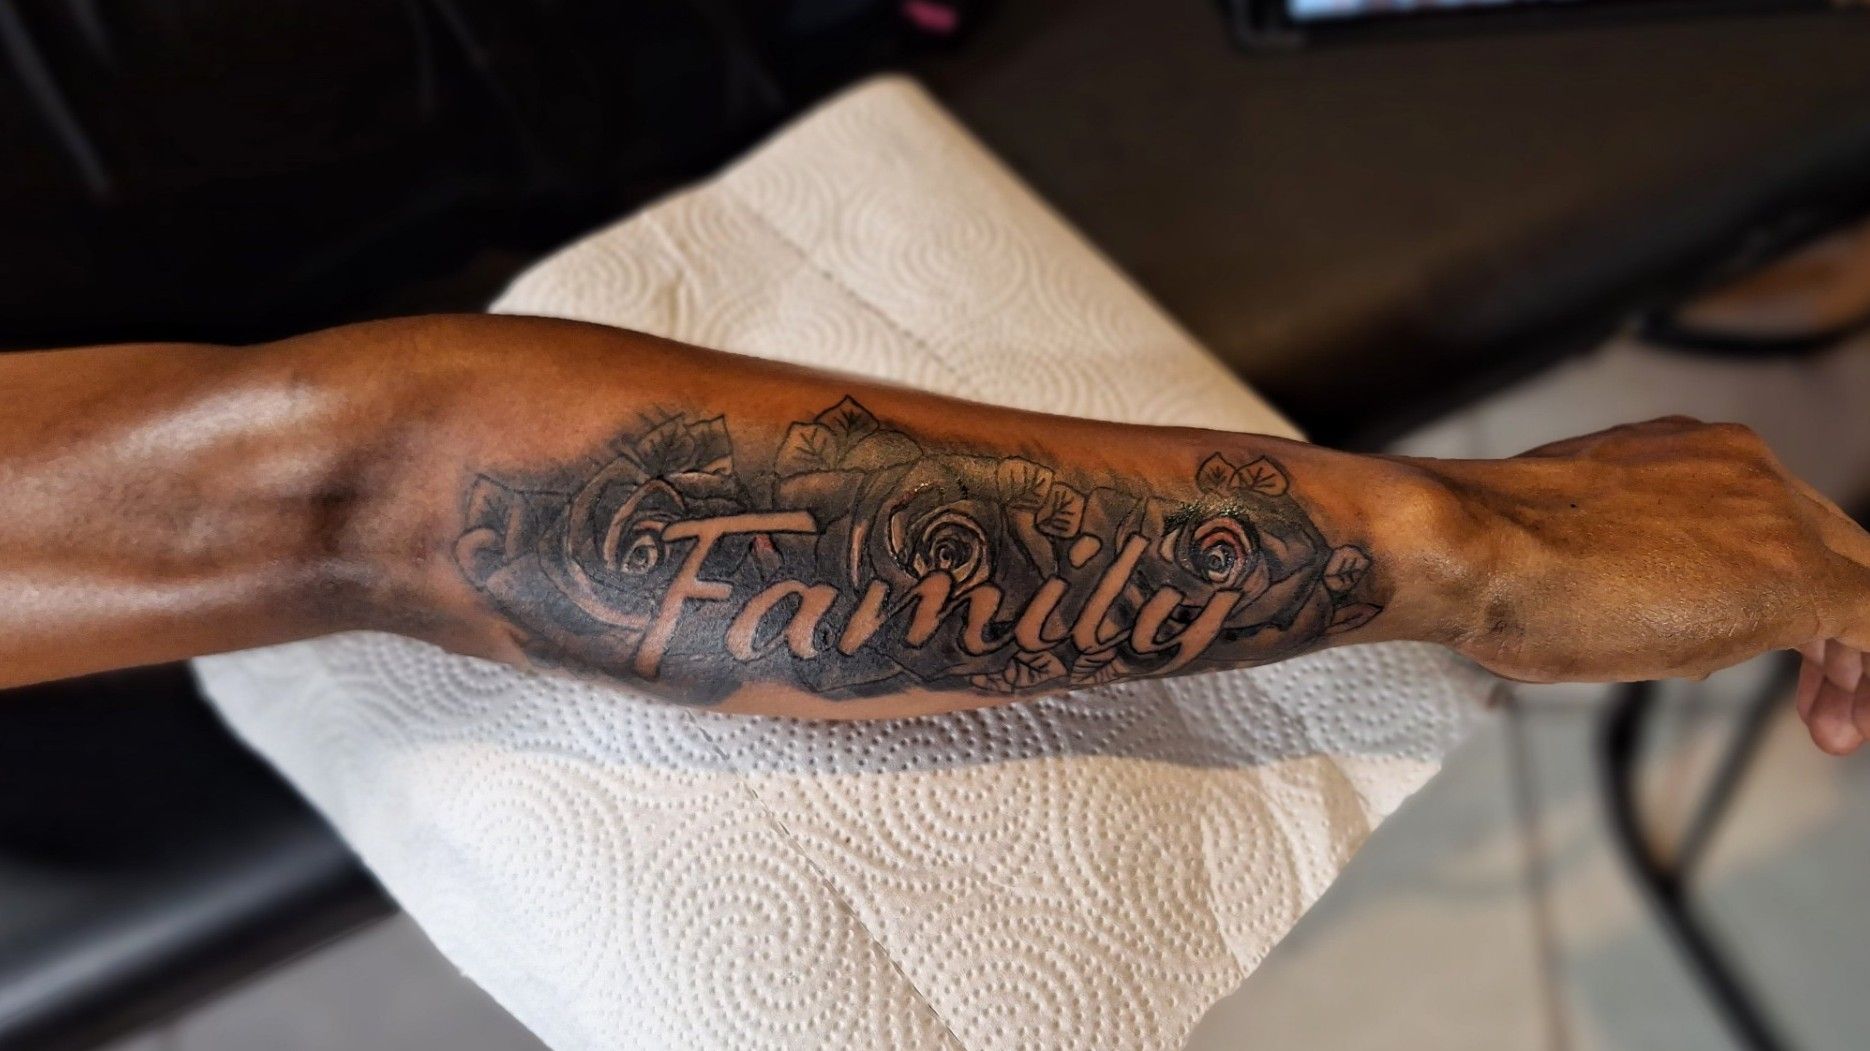 family first tattoos for men on forearm